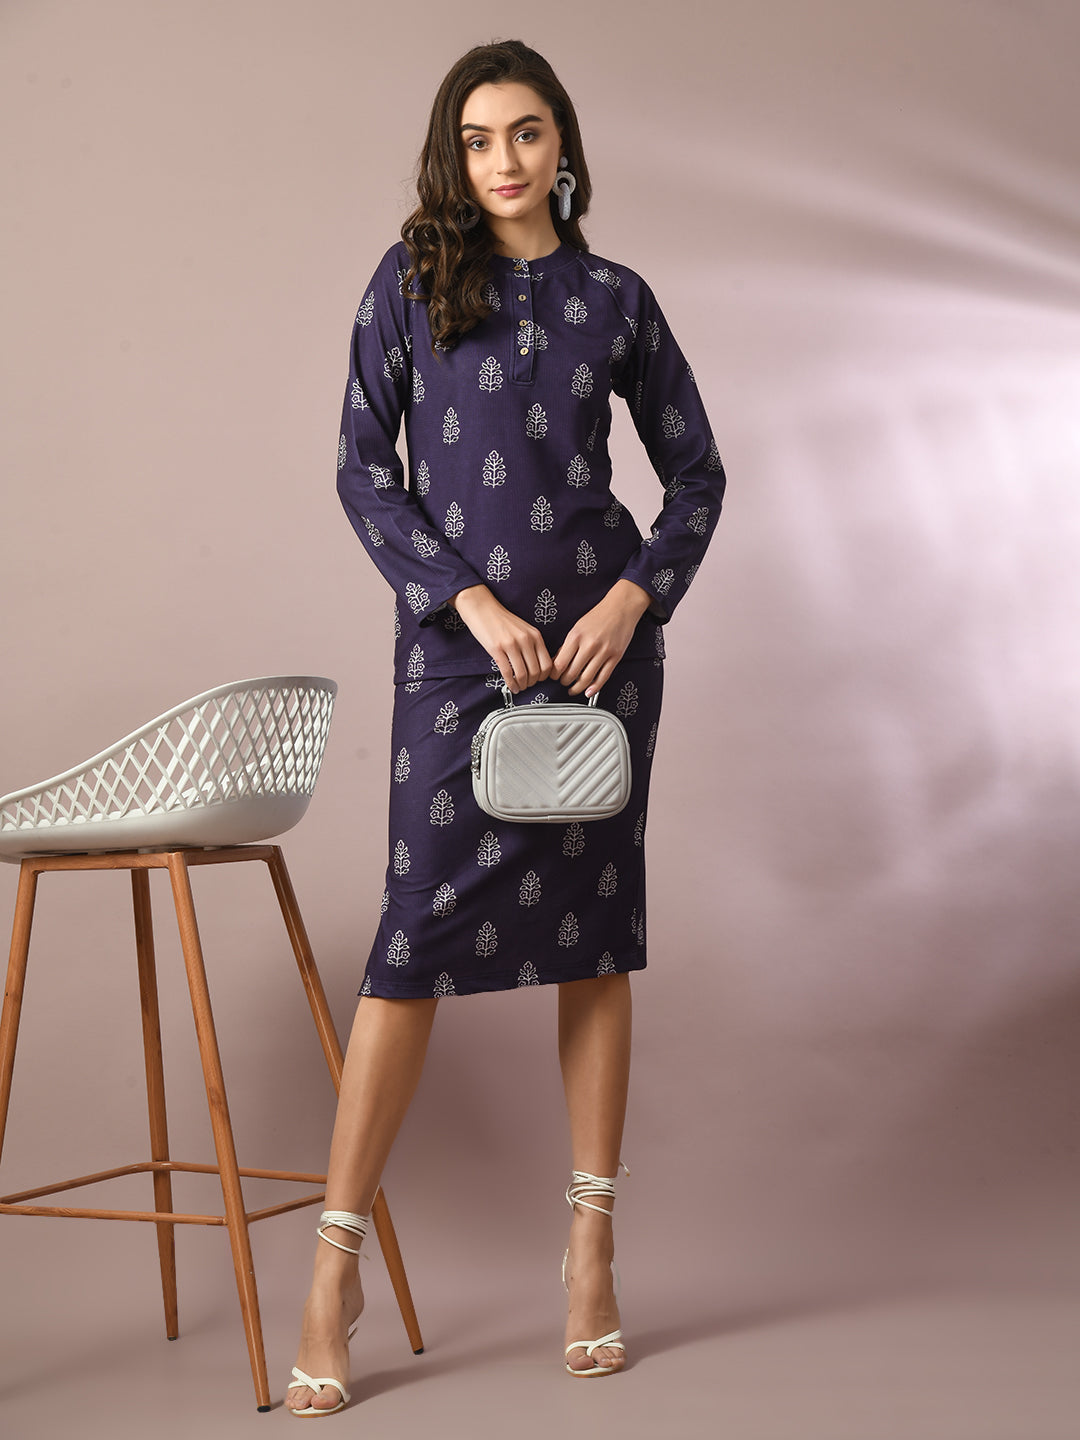 Women's  Navy Blue Printed Round Neck Party Top With Skirt Co-Ord Set  - Myshka